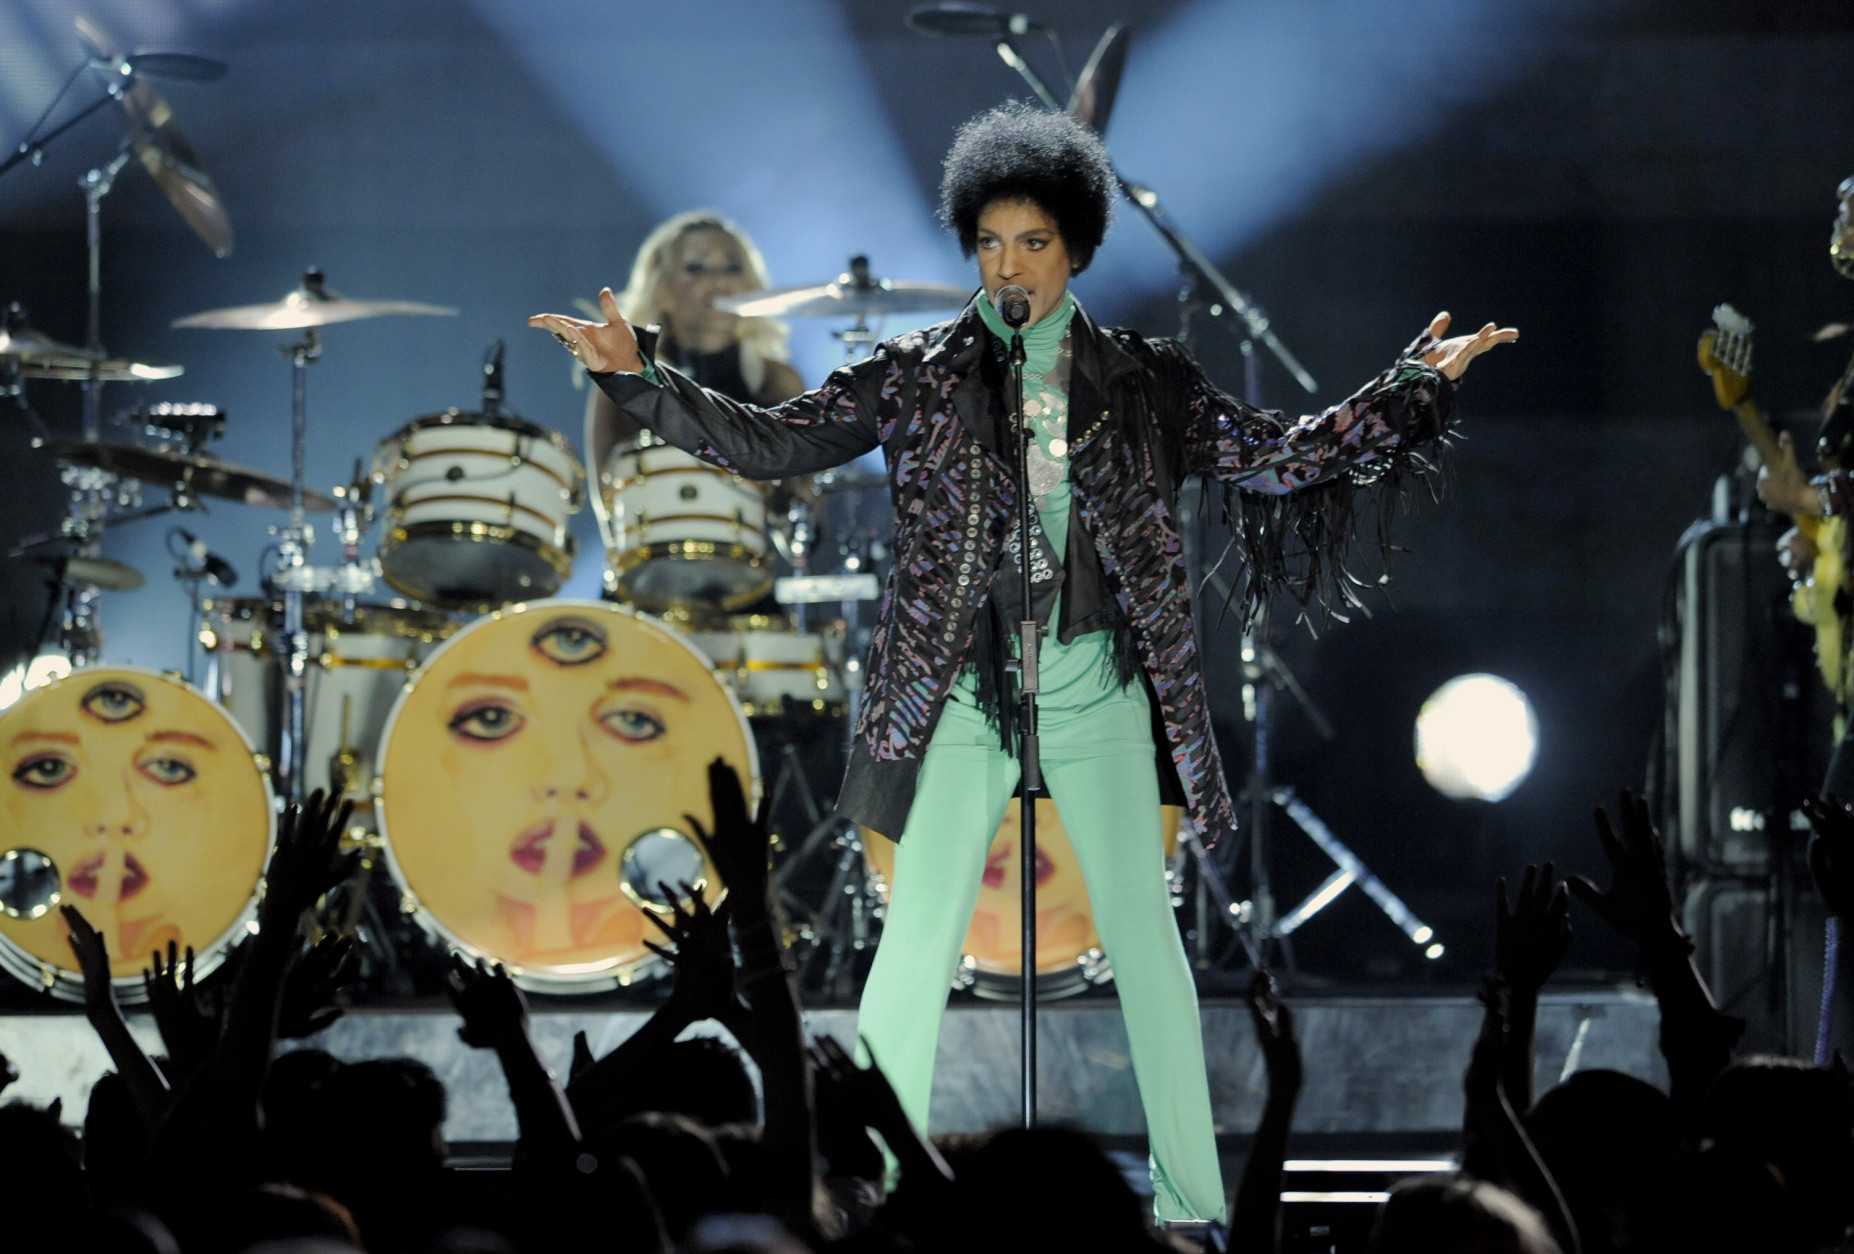 FINE - In this May 19, 2013 file photo, Prince performs at the Billboard Music Awards at the MGM Grand Garden Arena, in Las Vegas. Fox's post-Super Bowl party will include Prince making a guest appearance on the comedy "New Girl." (Photo by Chris Pizzello/Invision/AP, File)